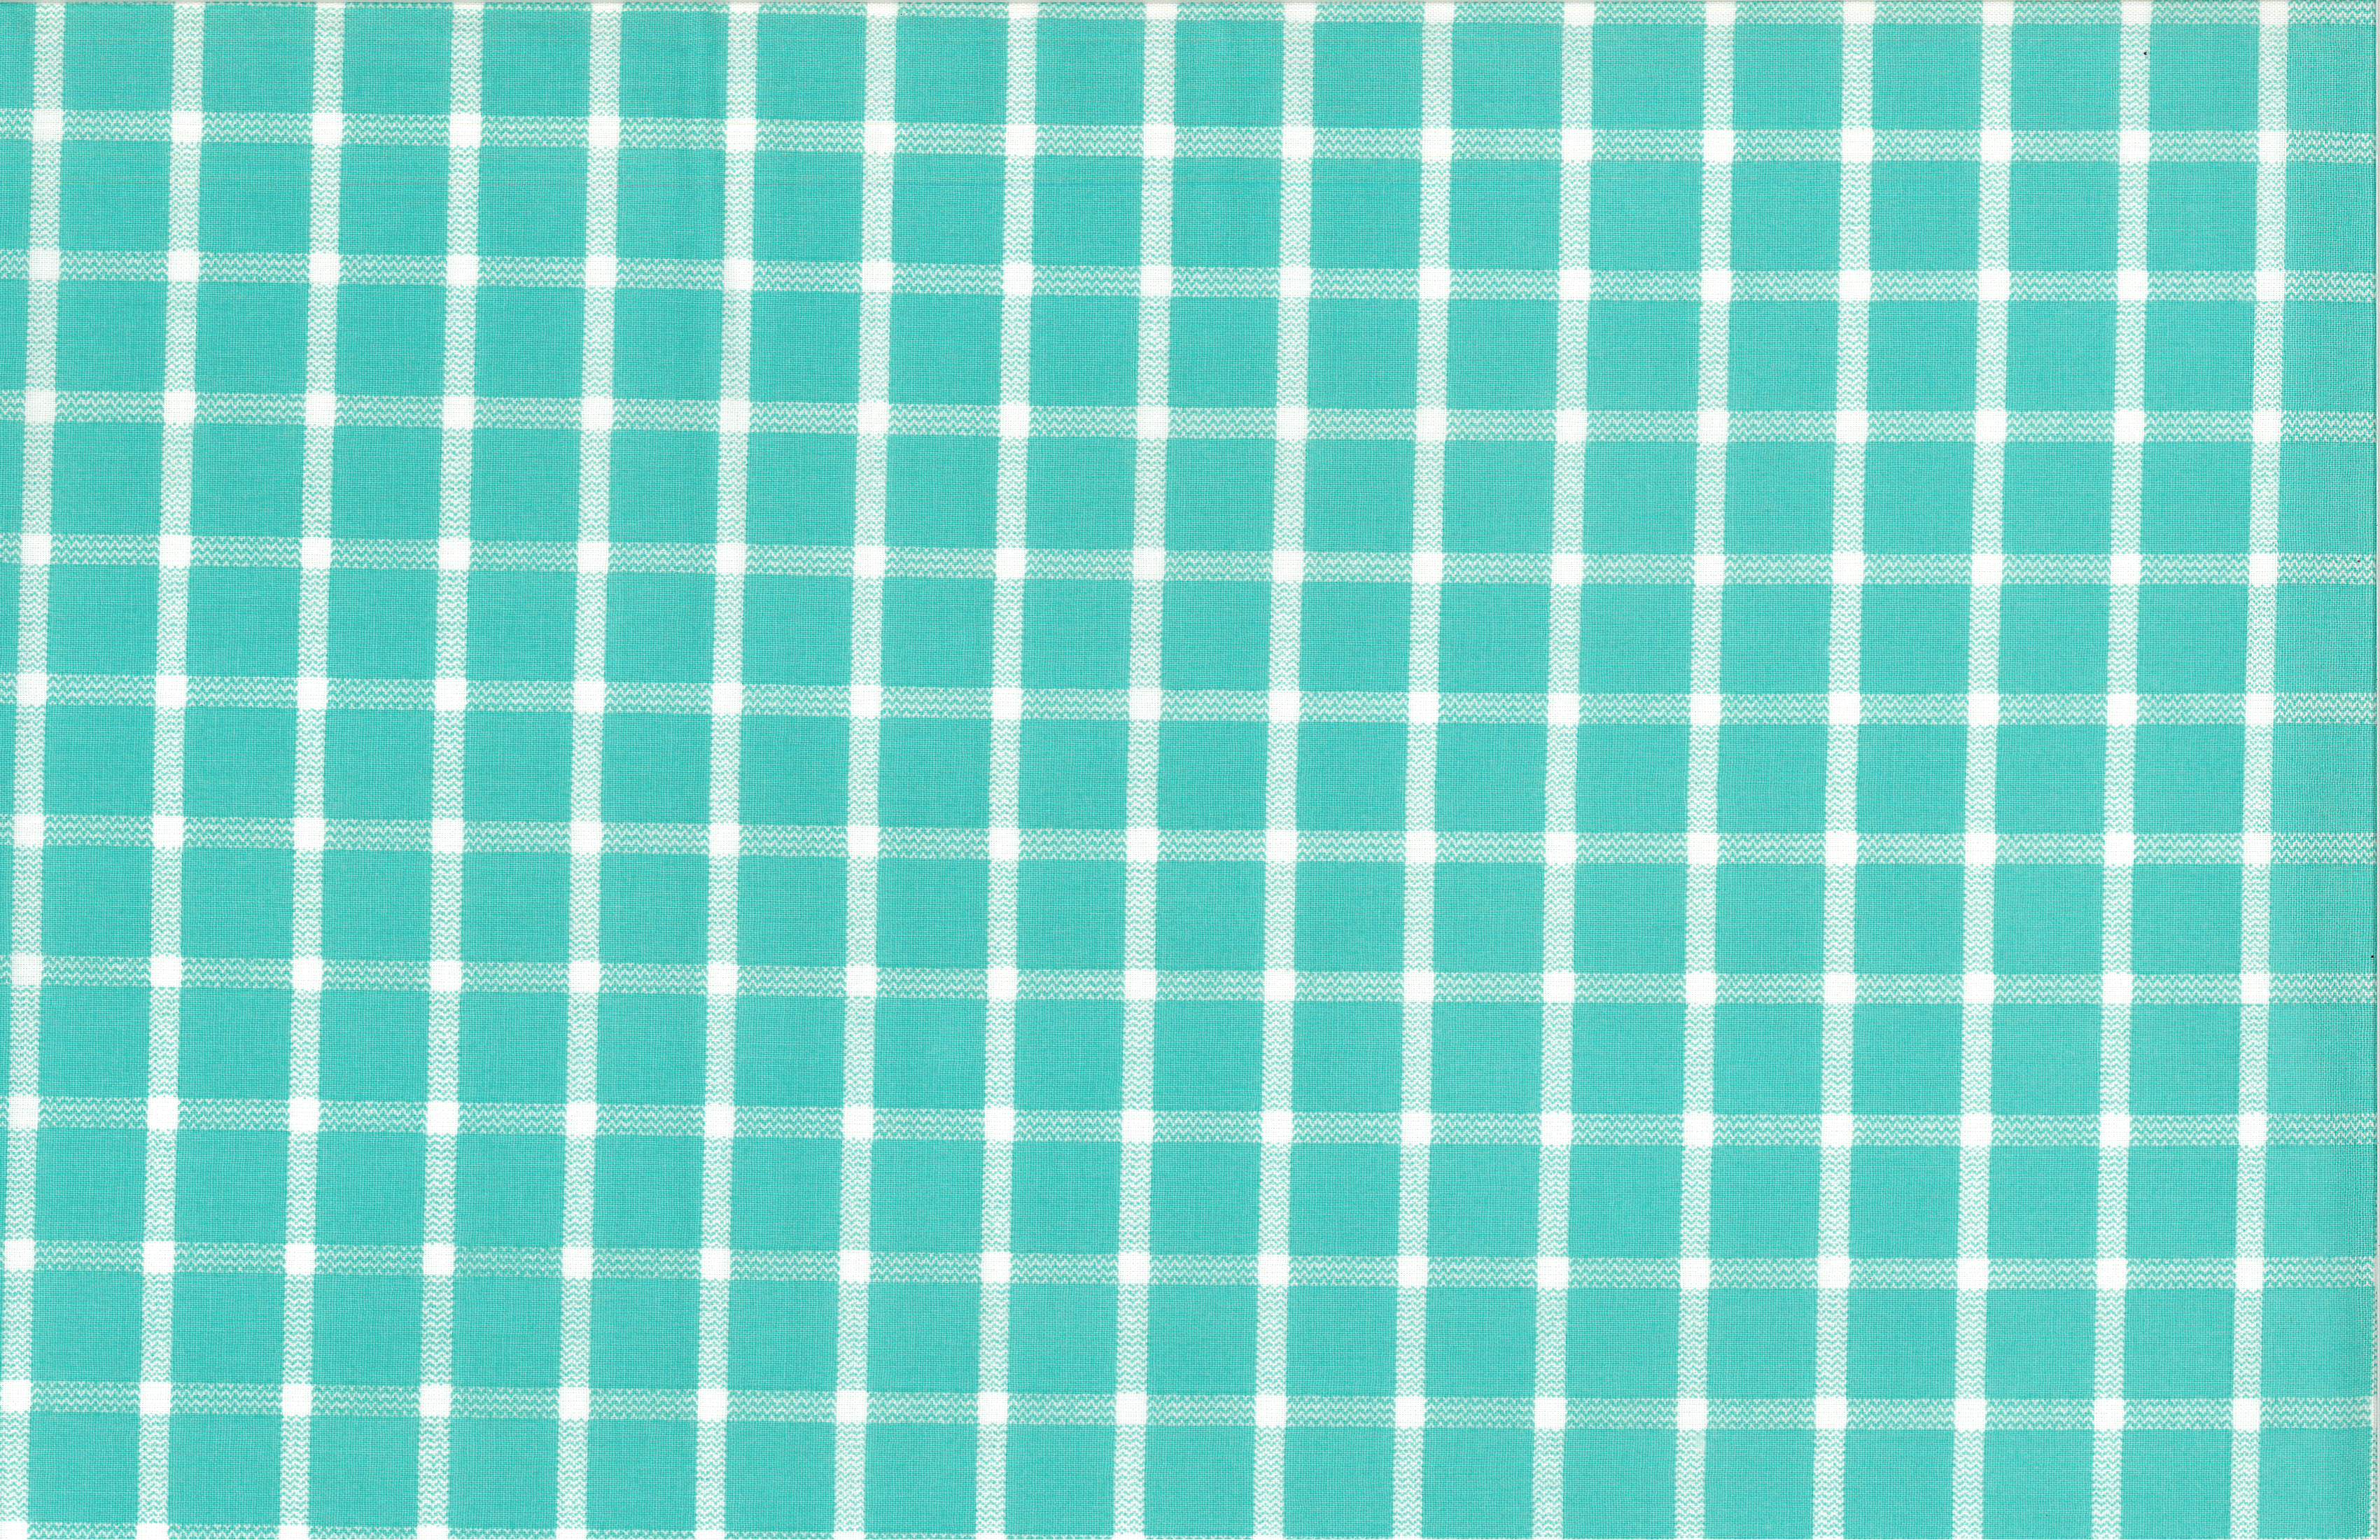 Waverly Inspirations Cotton 44" Picnic Plaid Rev Aqua Color Sewing Fabric by the Yard